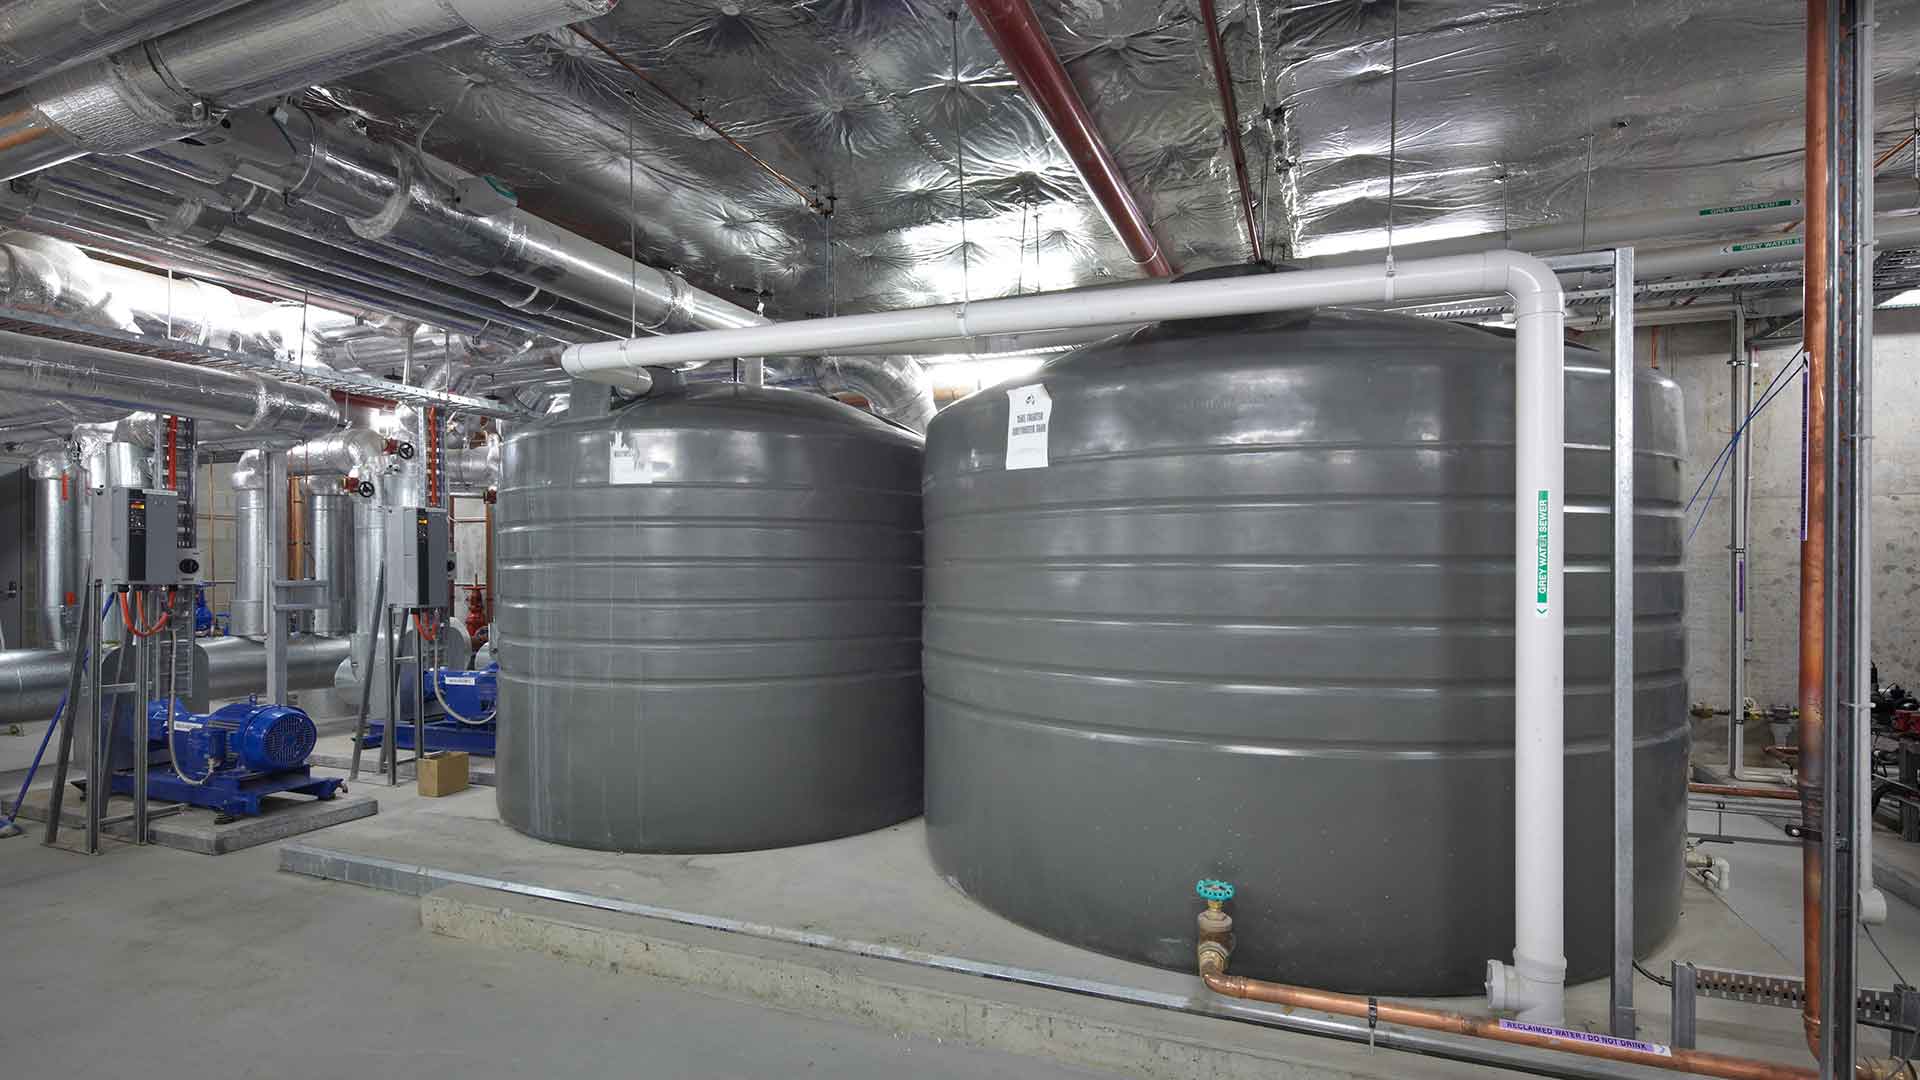 Two grey water tanks